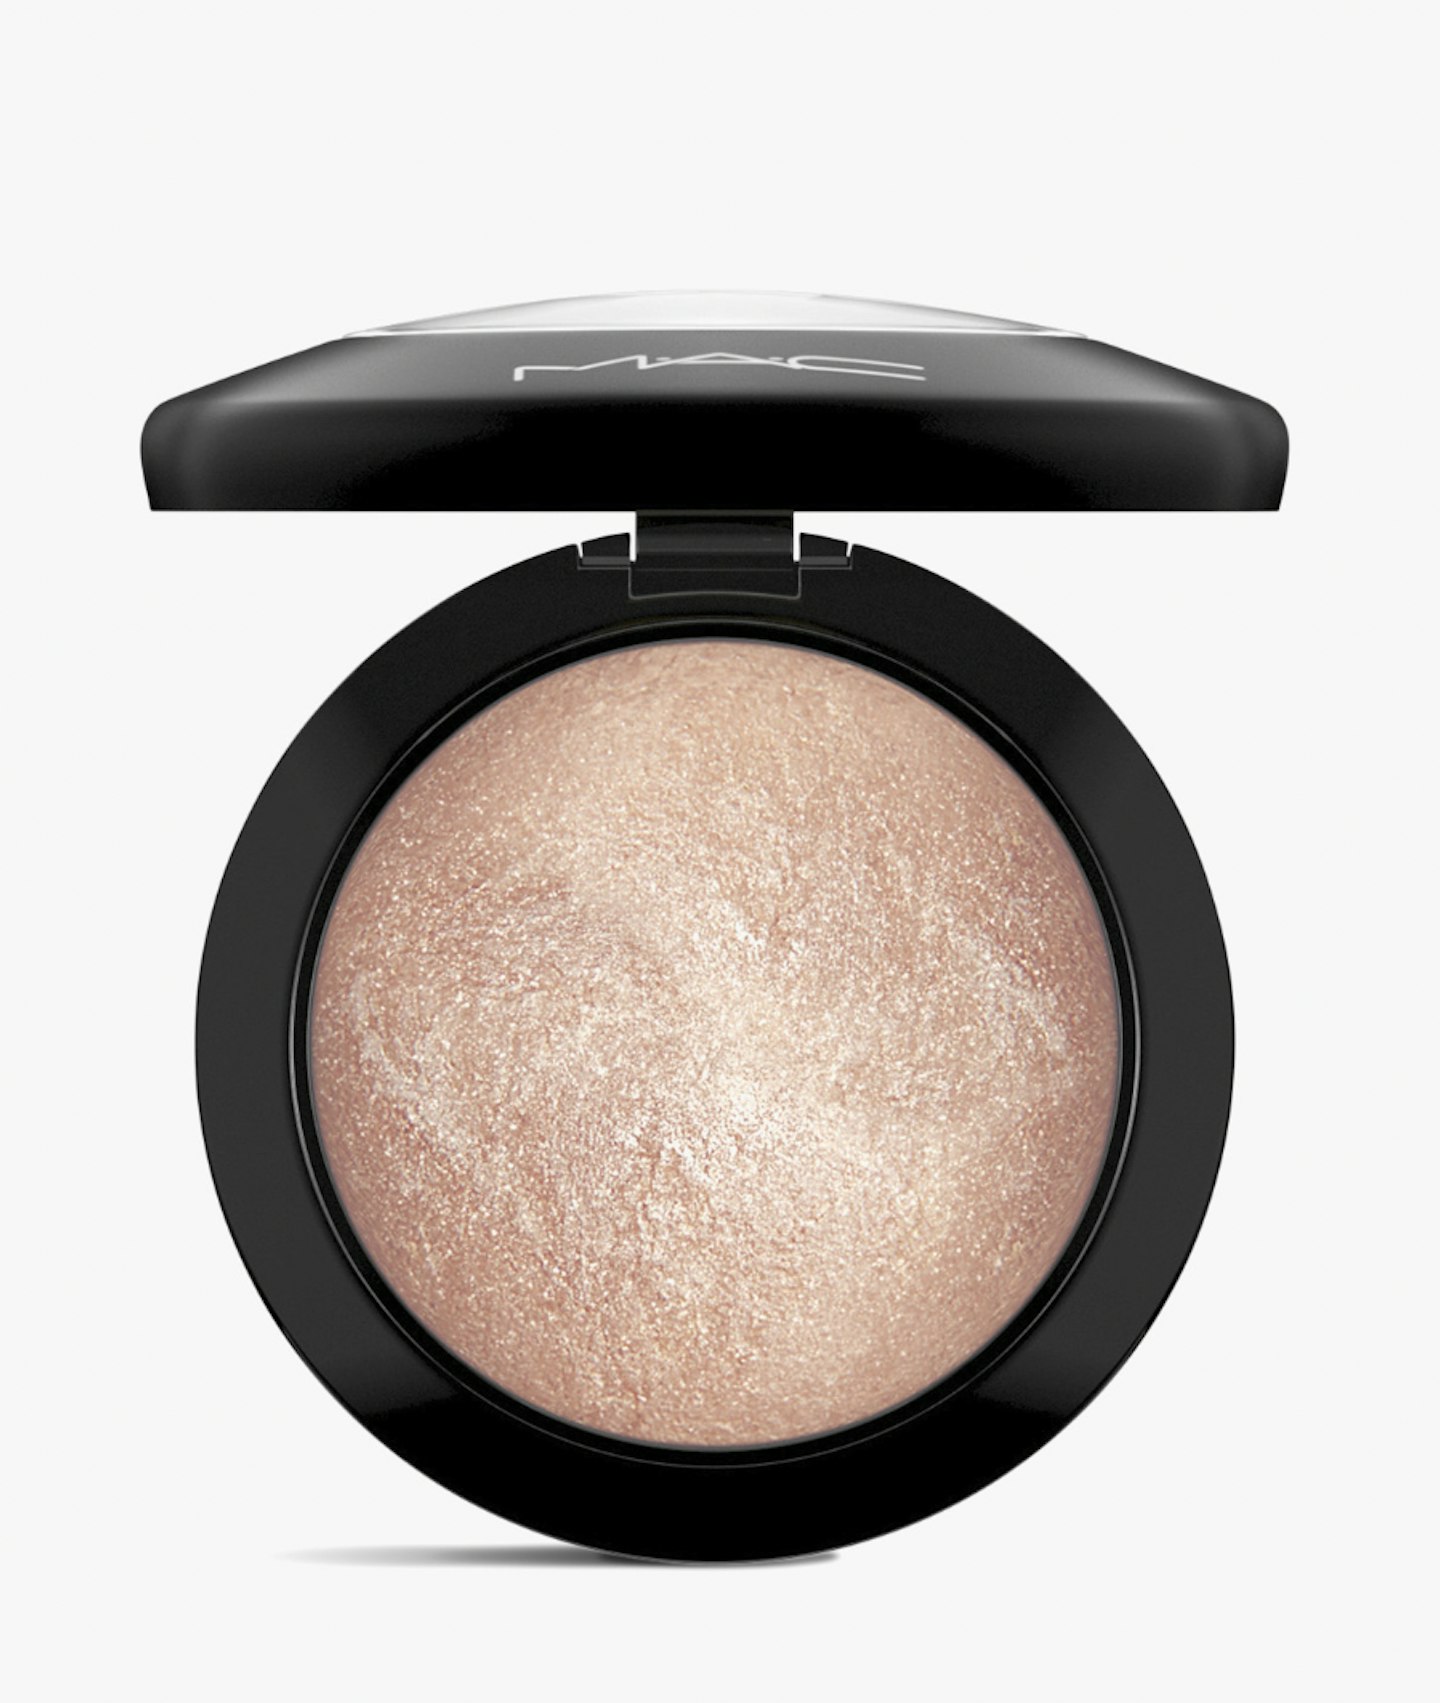 MAC Mineralize Skin Finish, Soft and Gentle, £27